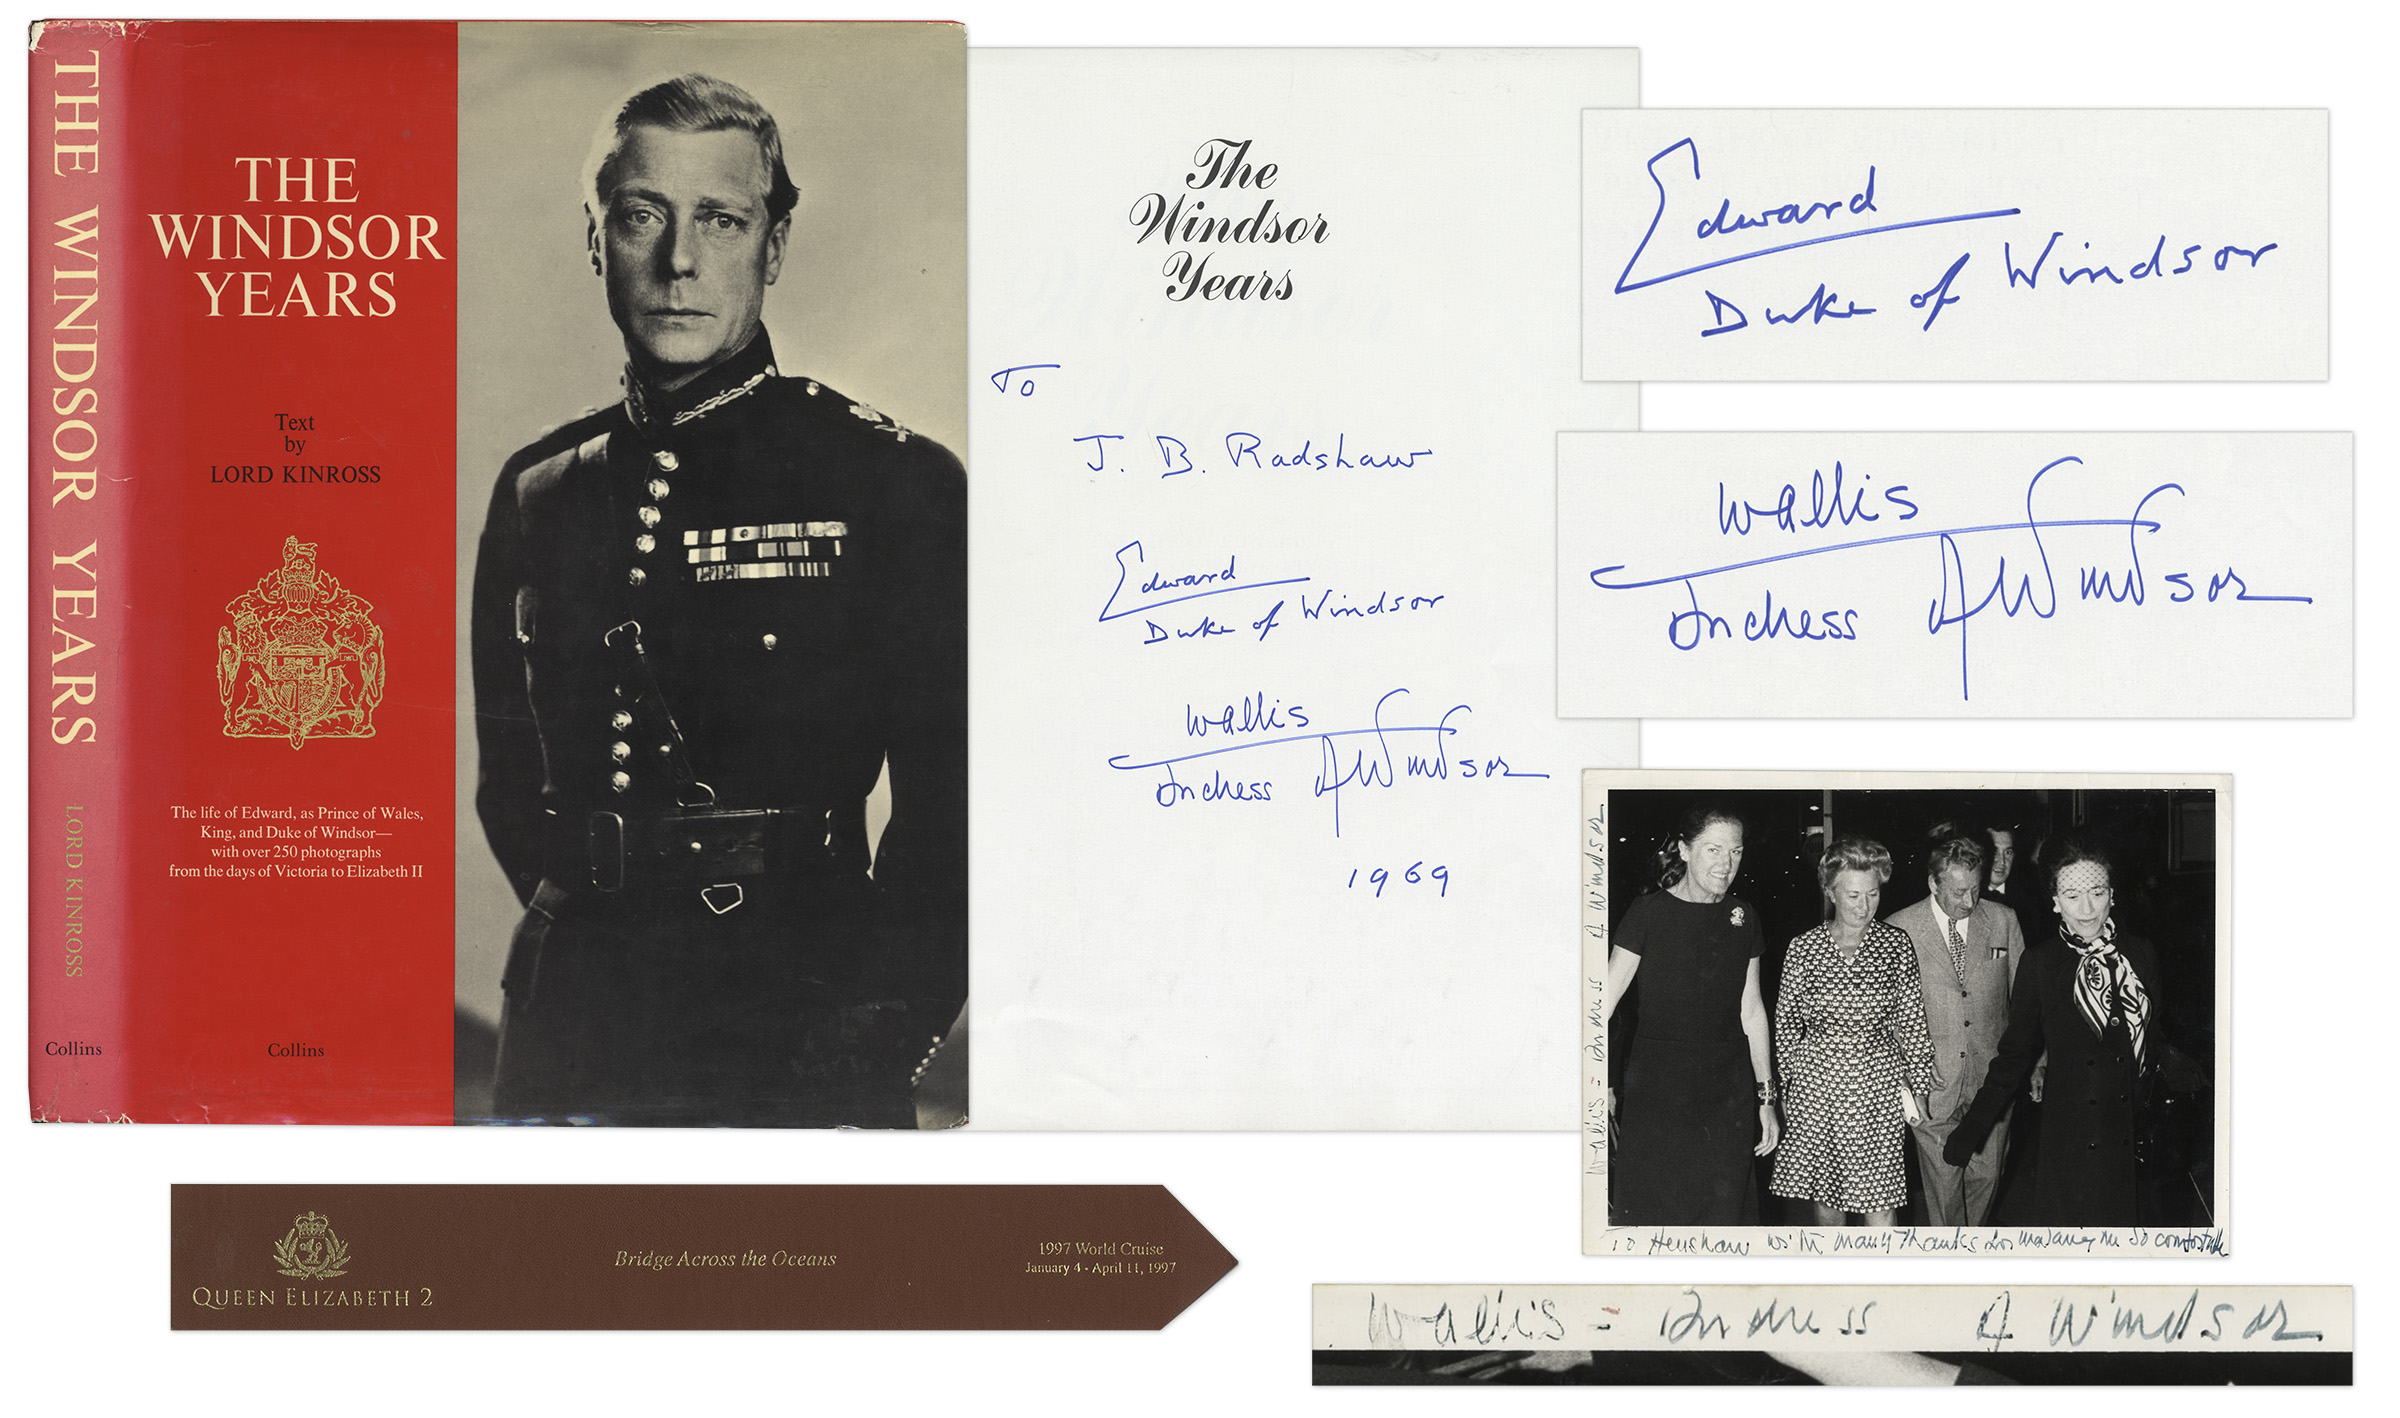 King Edward Memorabilia Duke and Duchess of Windsor Signed Book, "The Windsor Years" -- With Additional Signed Photo by Wallis Simpson